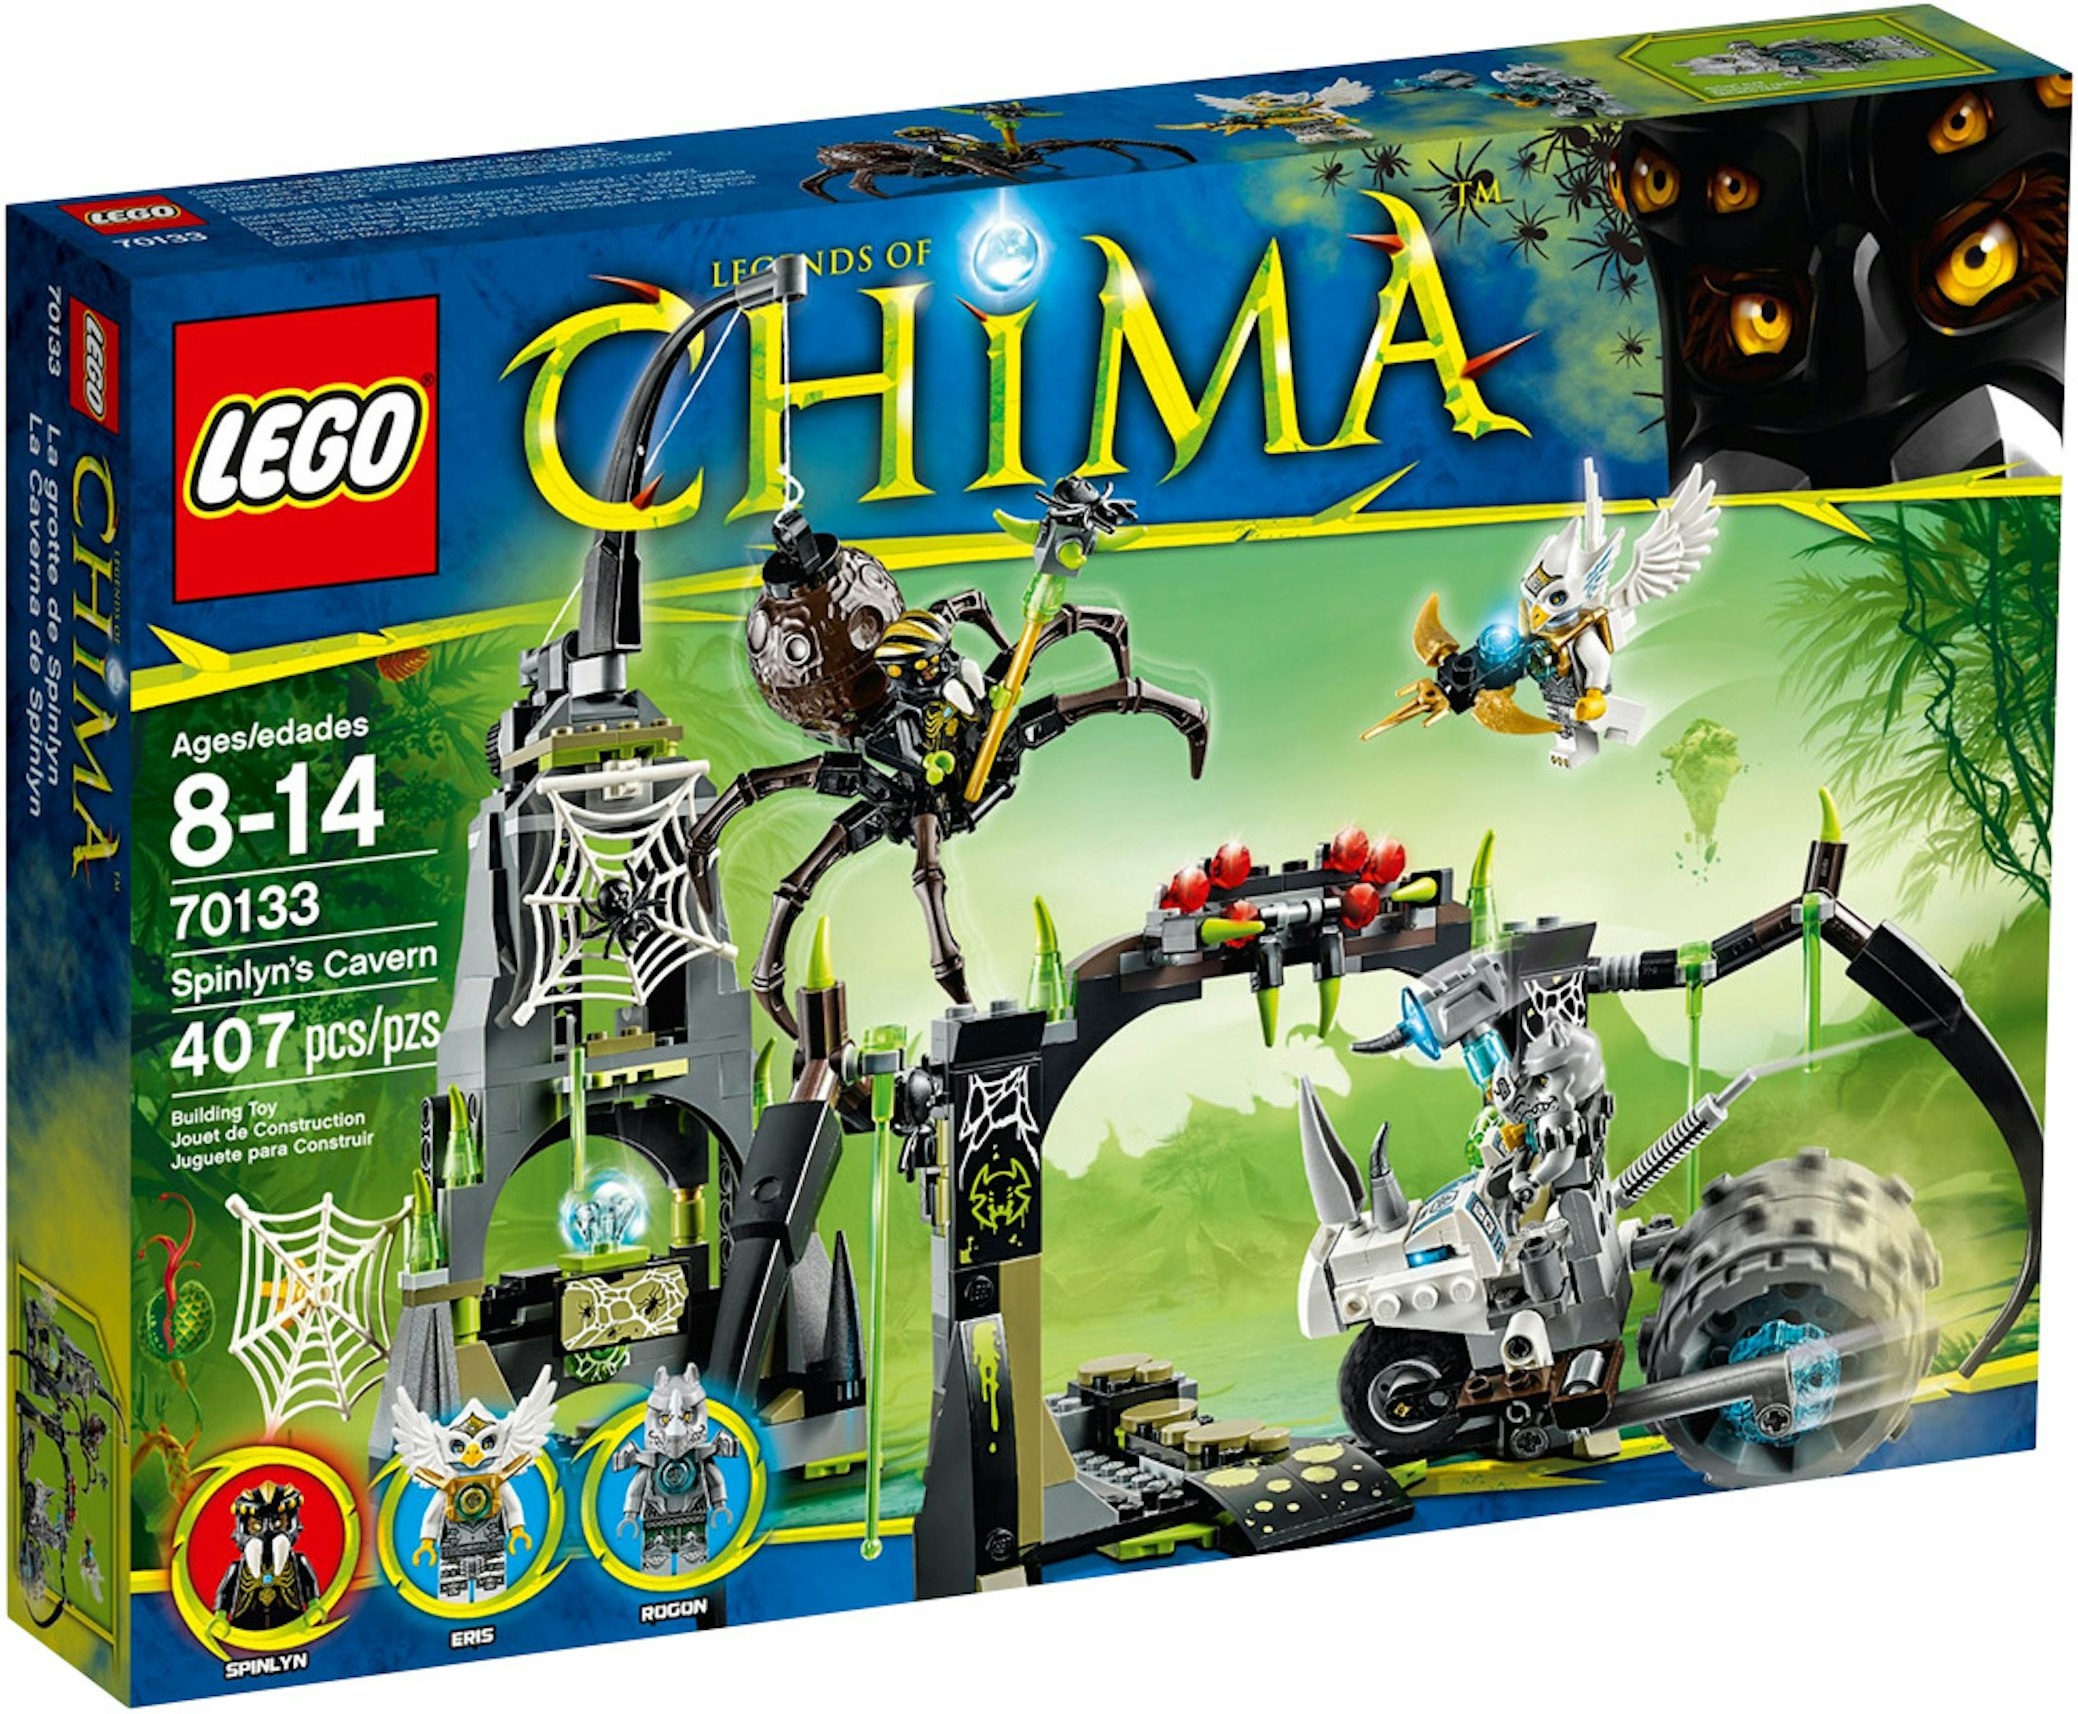 LEGO Legends of Chima Spinlyn's Cavern Set - US